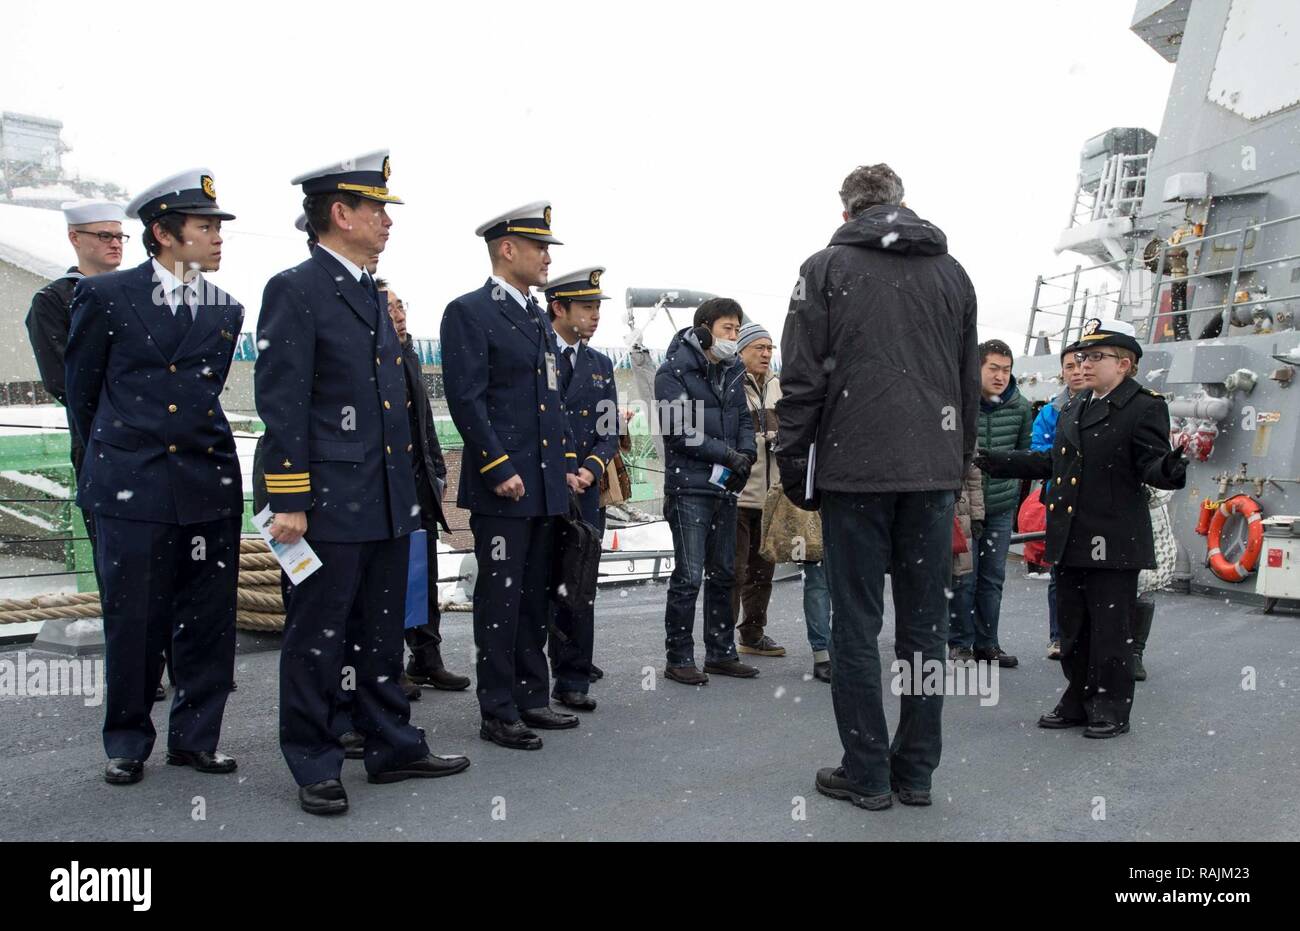 OTARU, Japan (Feb. 04, 2017) Lt. j.g. Shelly Baldwin, assigned to the forward-deployed Arleigh Burke-class guided-missile destroyer USS McCampbell (DDG 85), gives a tour of the ship to members of Japan Coast Guard and city of Otaru Police Department at Otaru, Japan. McCampbell is on patrol in the 7th Fleet area of operations in support of security and stability in the Indo-Asia-Pacific region. Stock Photo